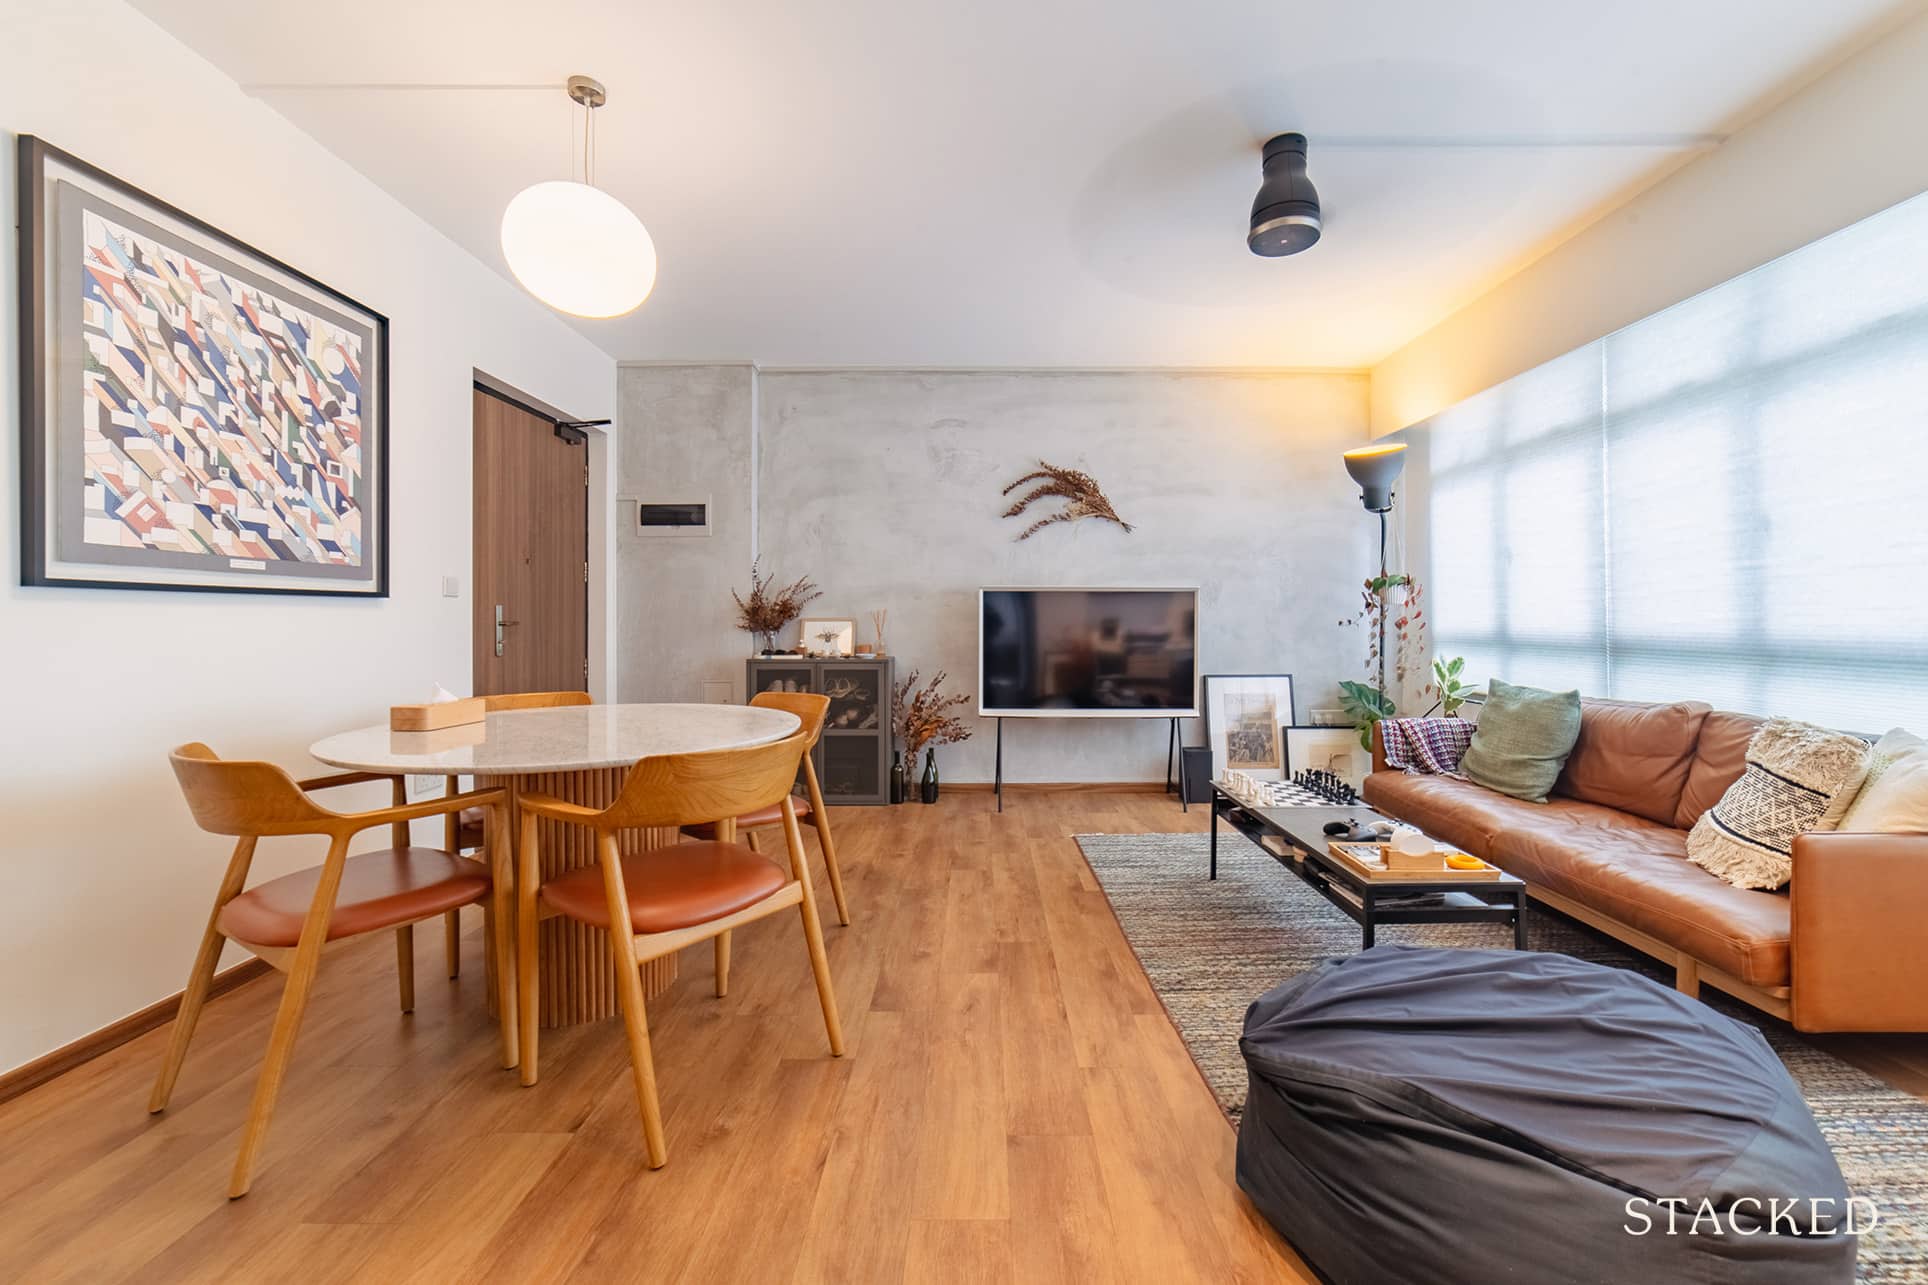 Inside A Cosy $45k Renovation Of A Tiong Bahru HDB: How A Couple Self-Designed Their European/Jap-Inspired Home – Property Blog Singapore